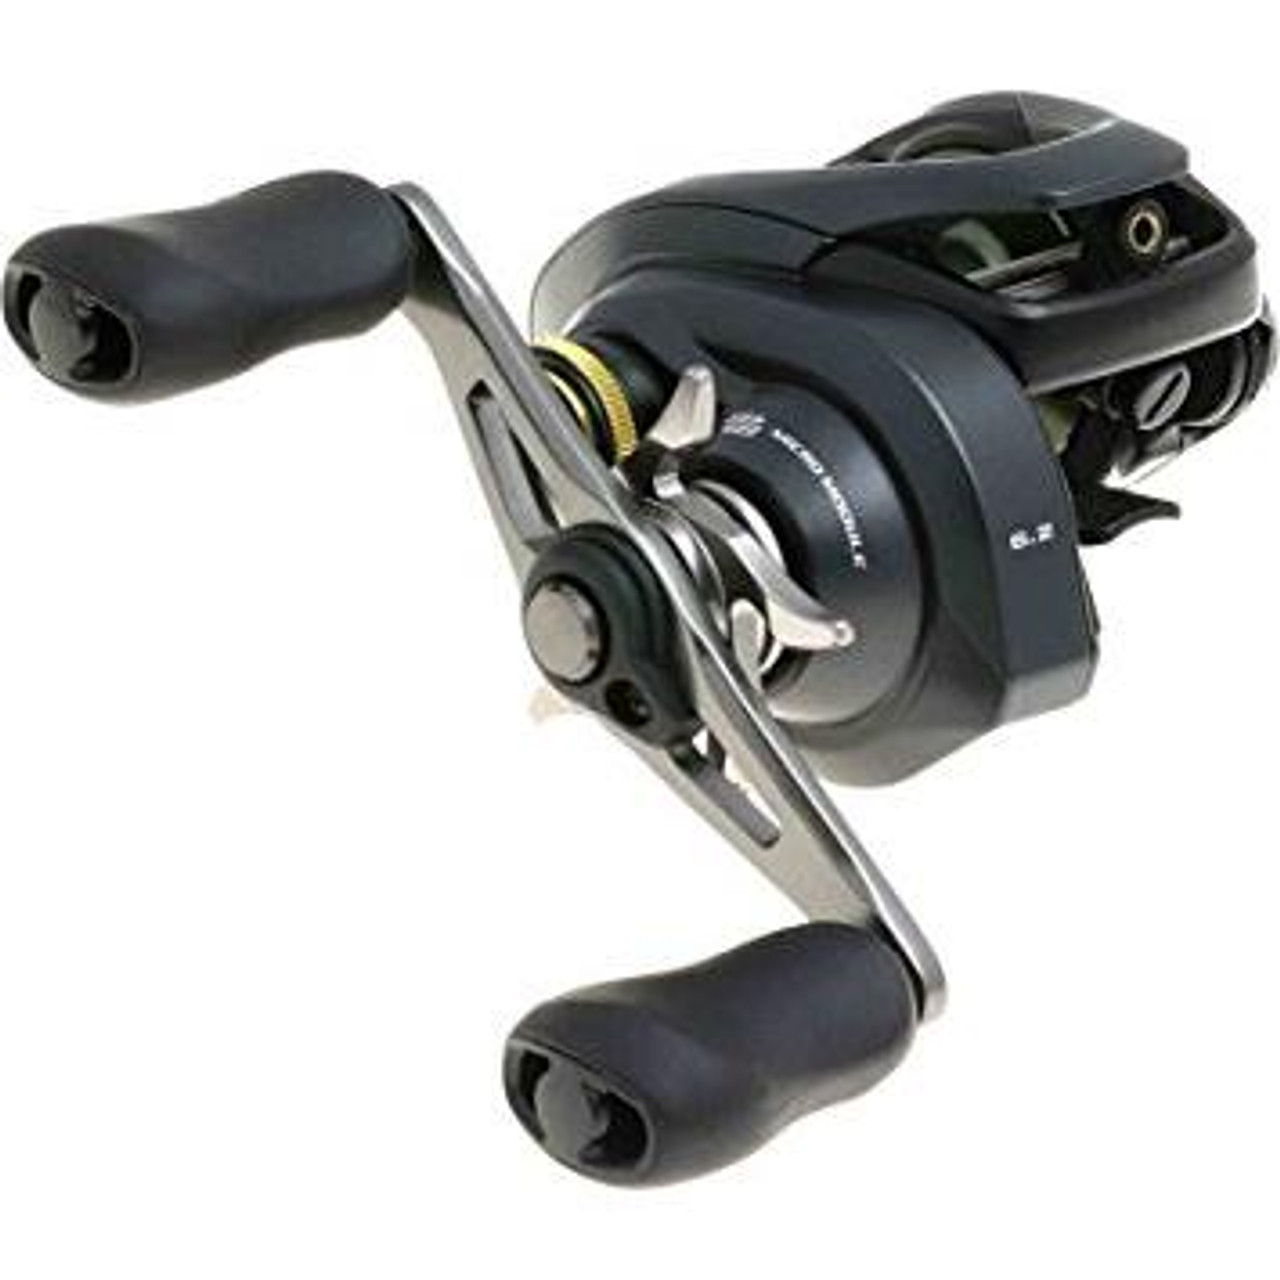 https://cdn11.bigcommerce.com/s-70mih4s/images/stencil/1280x1280/products/10250/38329/Shimano-Curado-Baitcasting-Reels-02225518410_image1__24540.1524782856.jpg?c=2